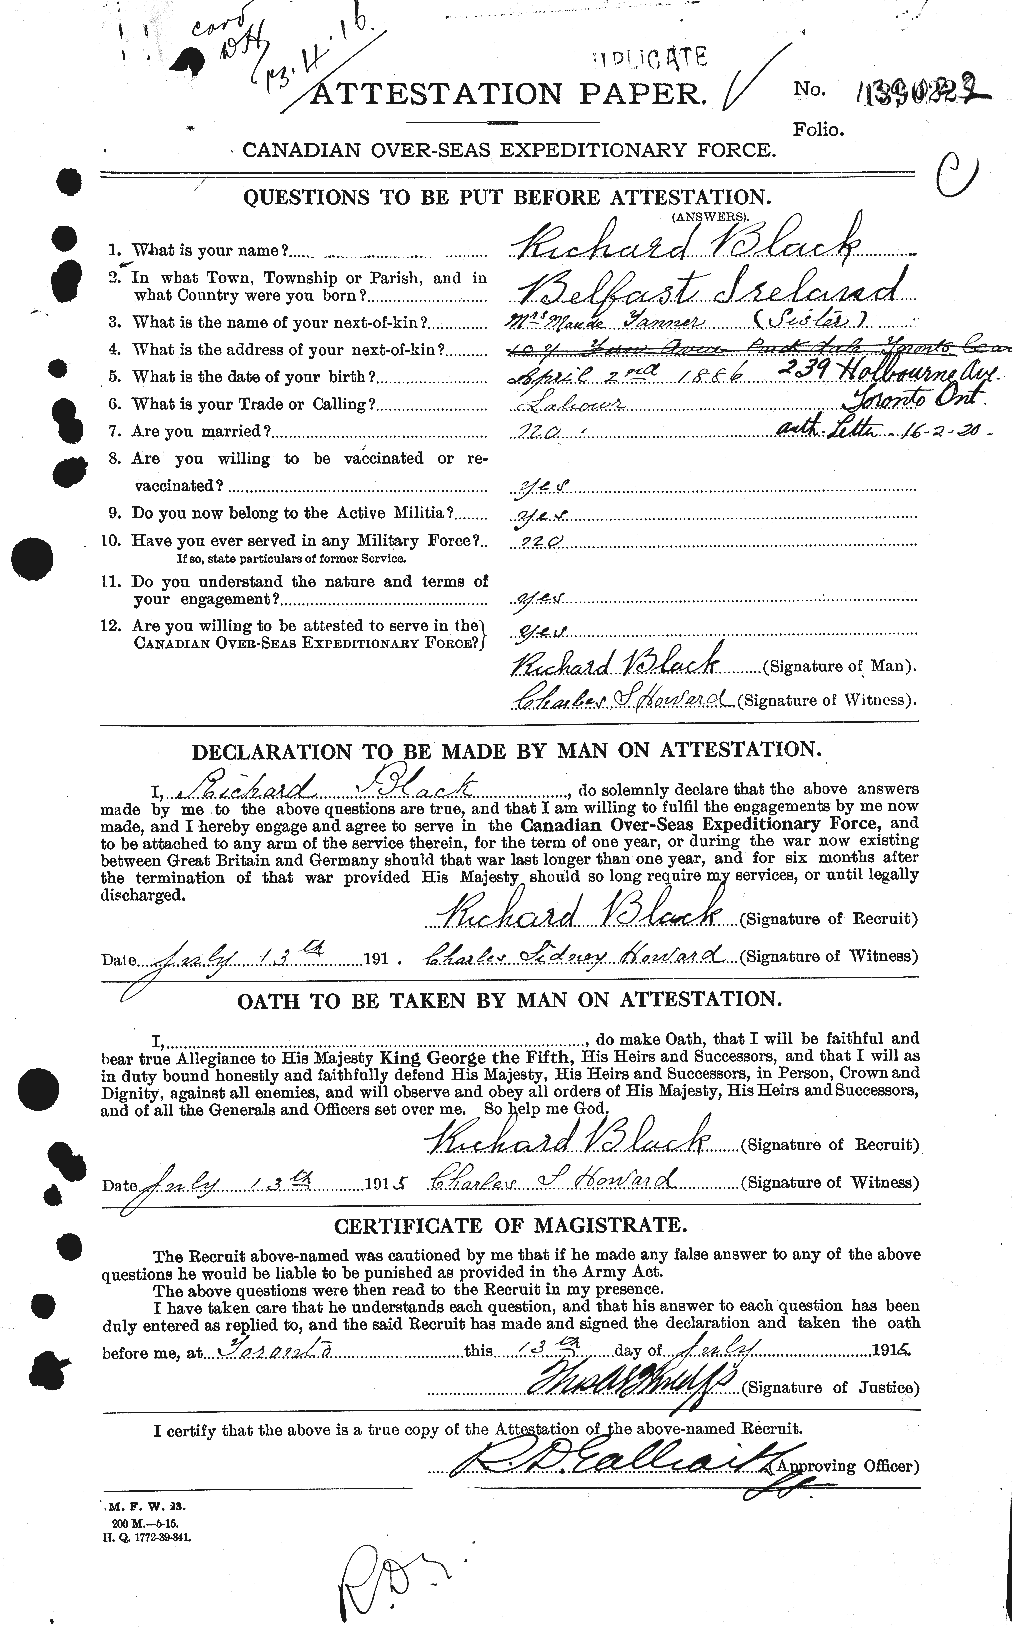 Personnel Records of the First World War - CEF 247563a